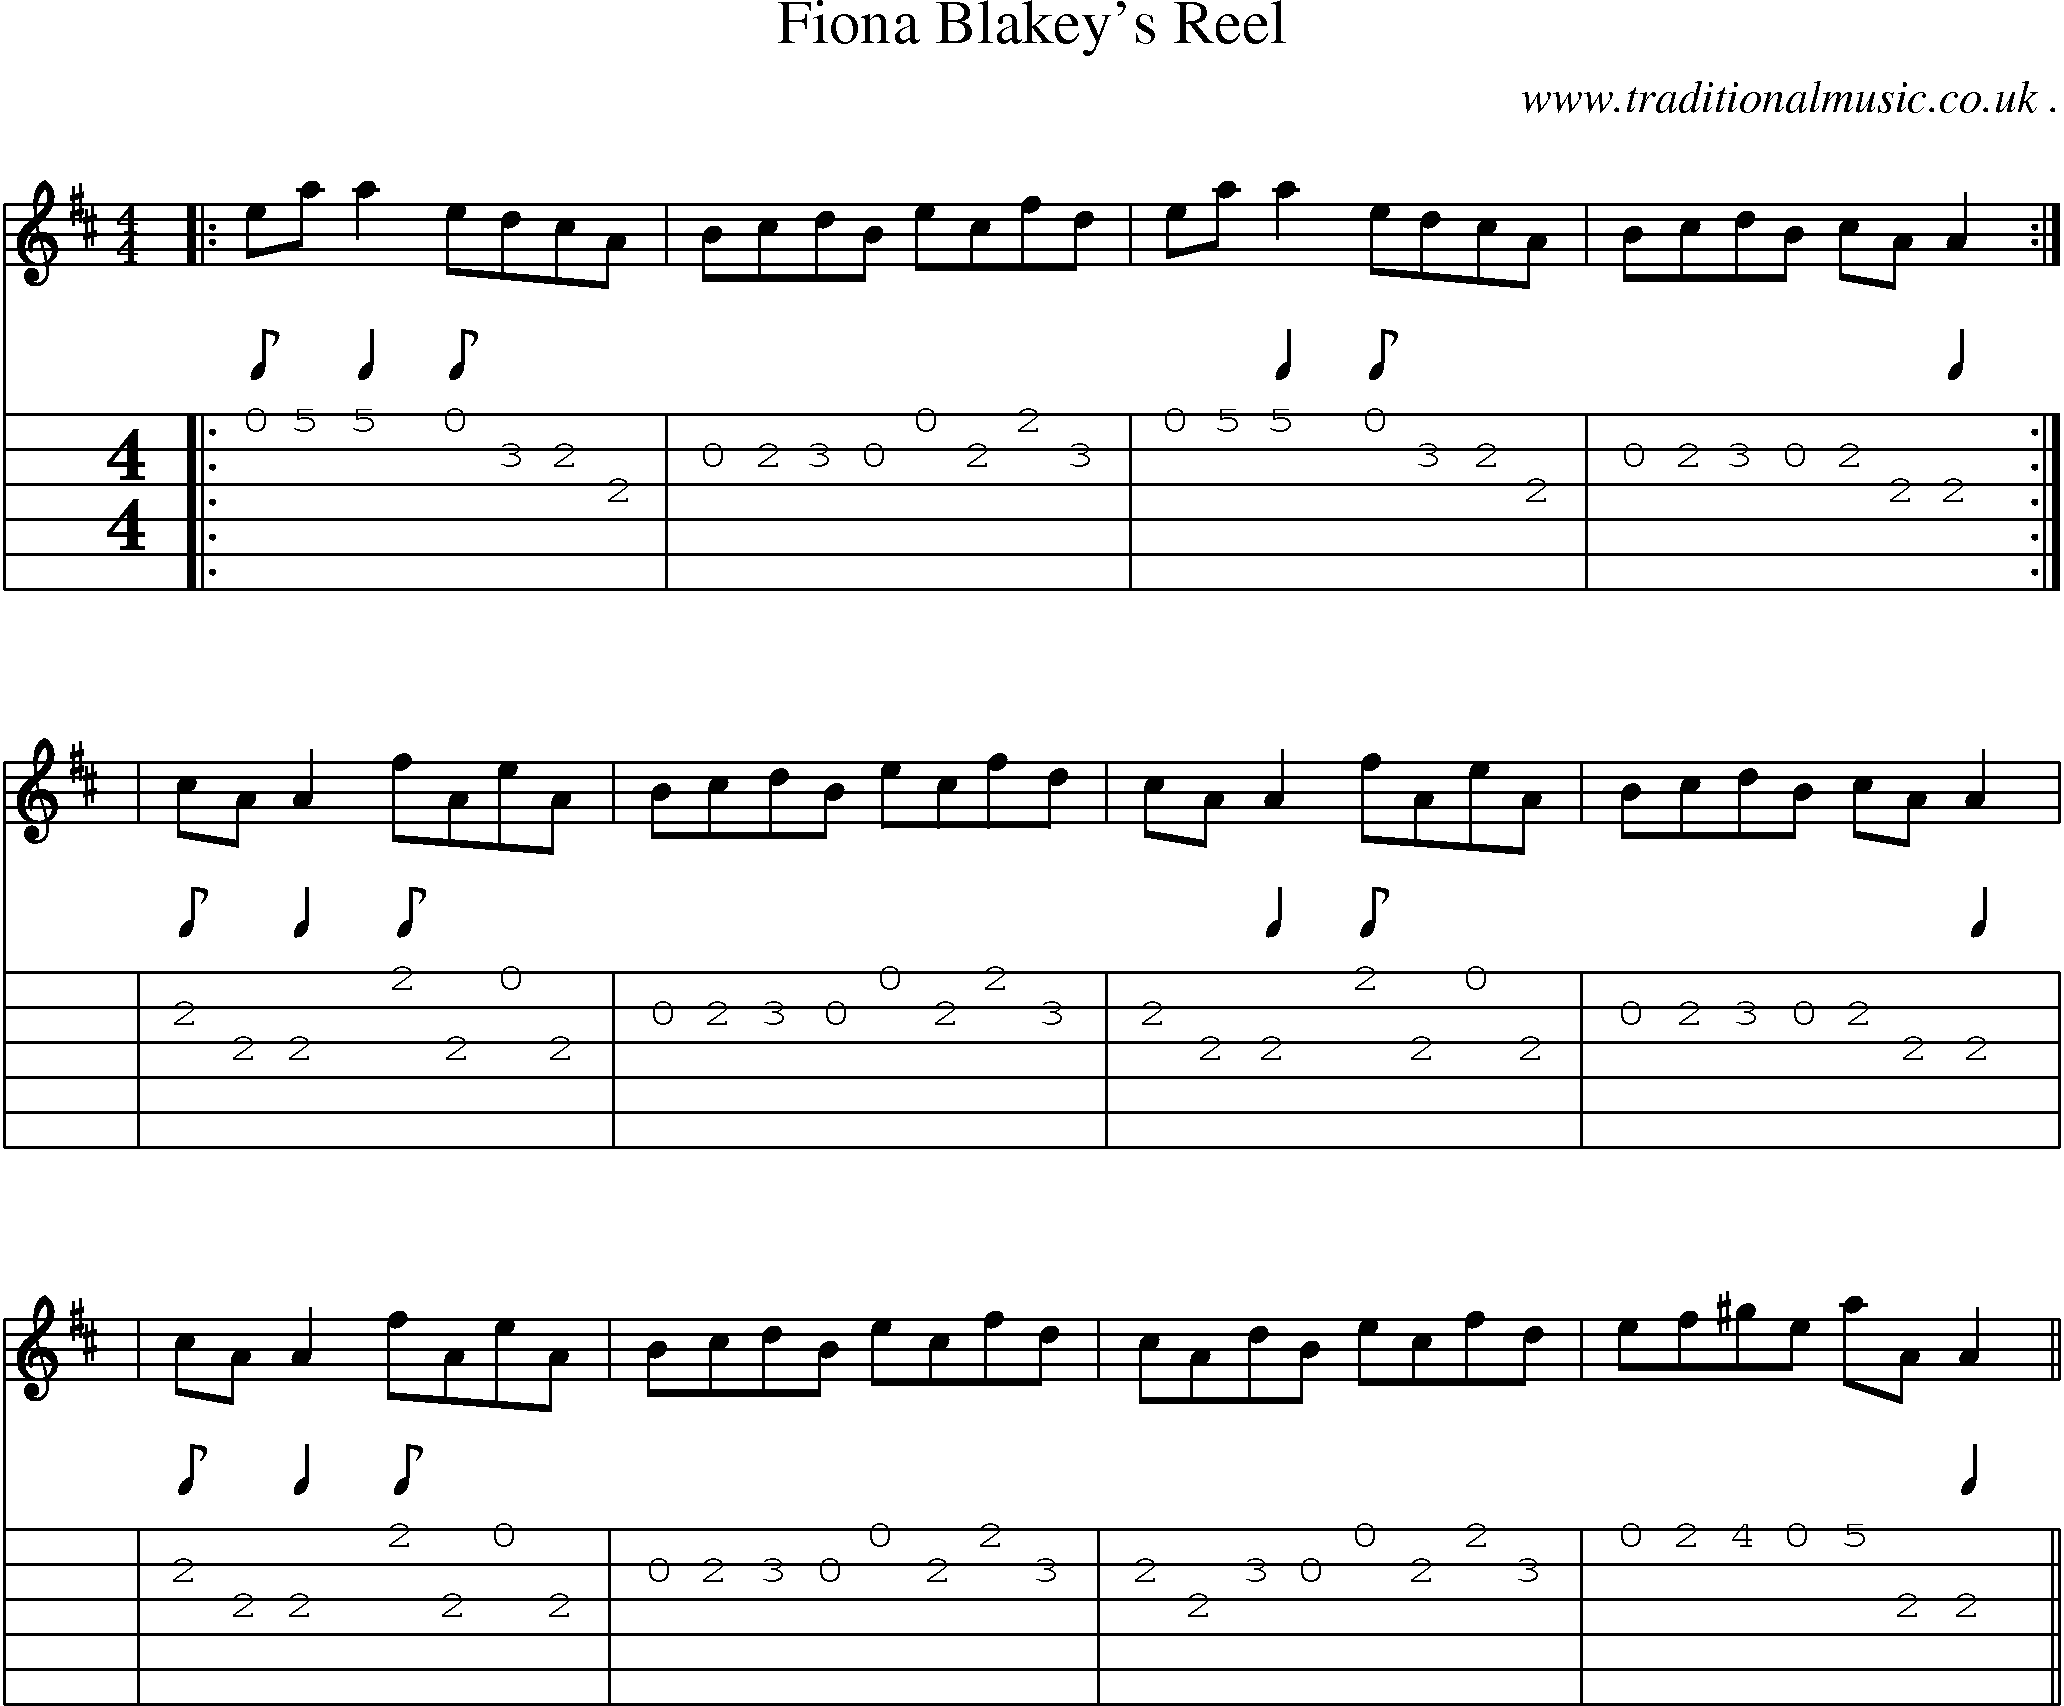 Sheet-Music and Guitar Tabs for Fiona Blakeys Reel